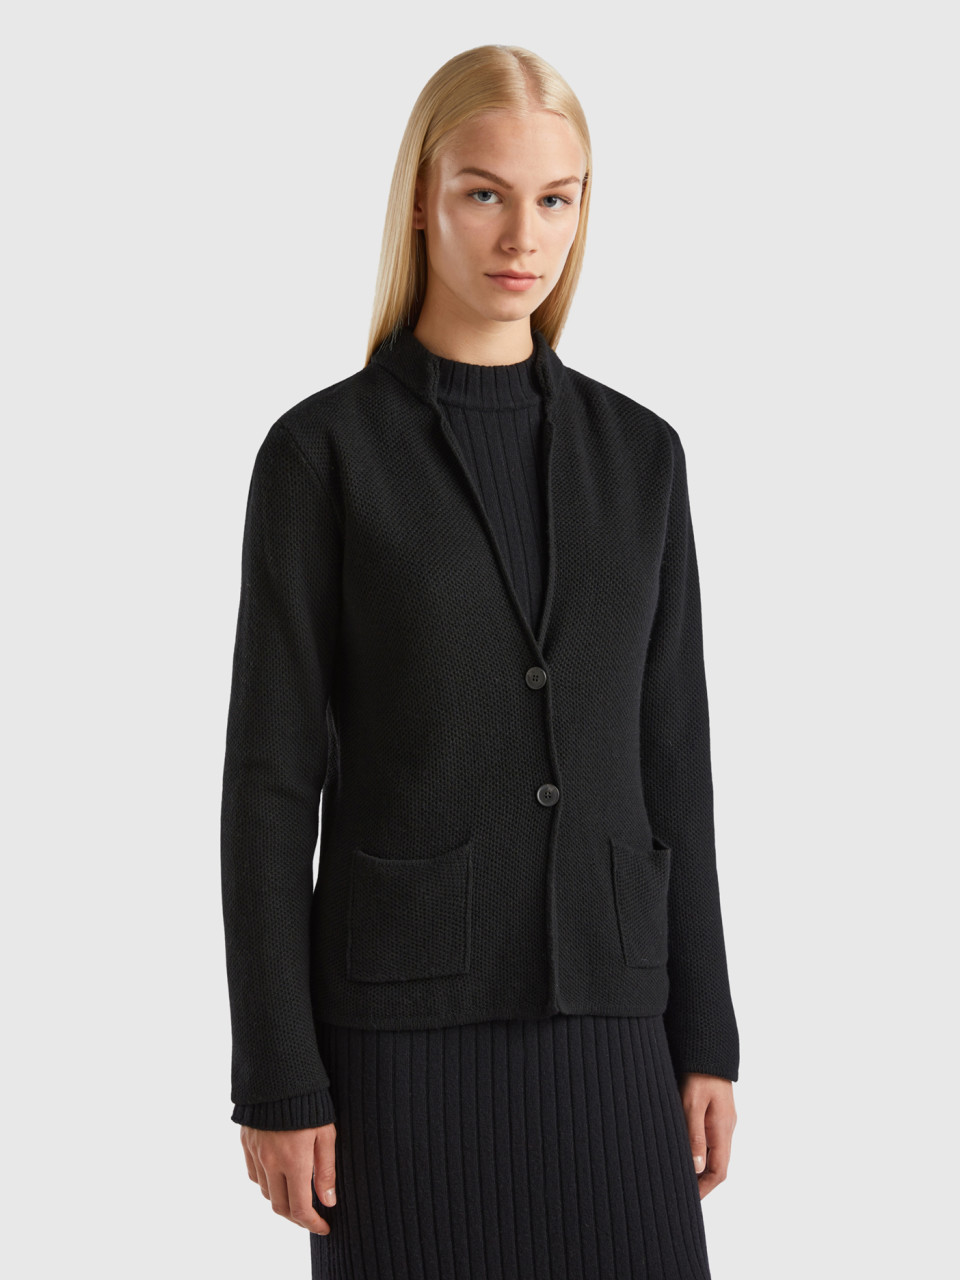 Benetton, Knit Jacket In Wool And Cashmere Blend, Black, Women